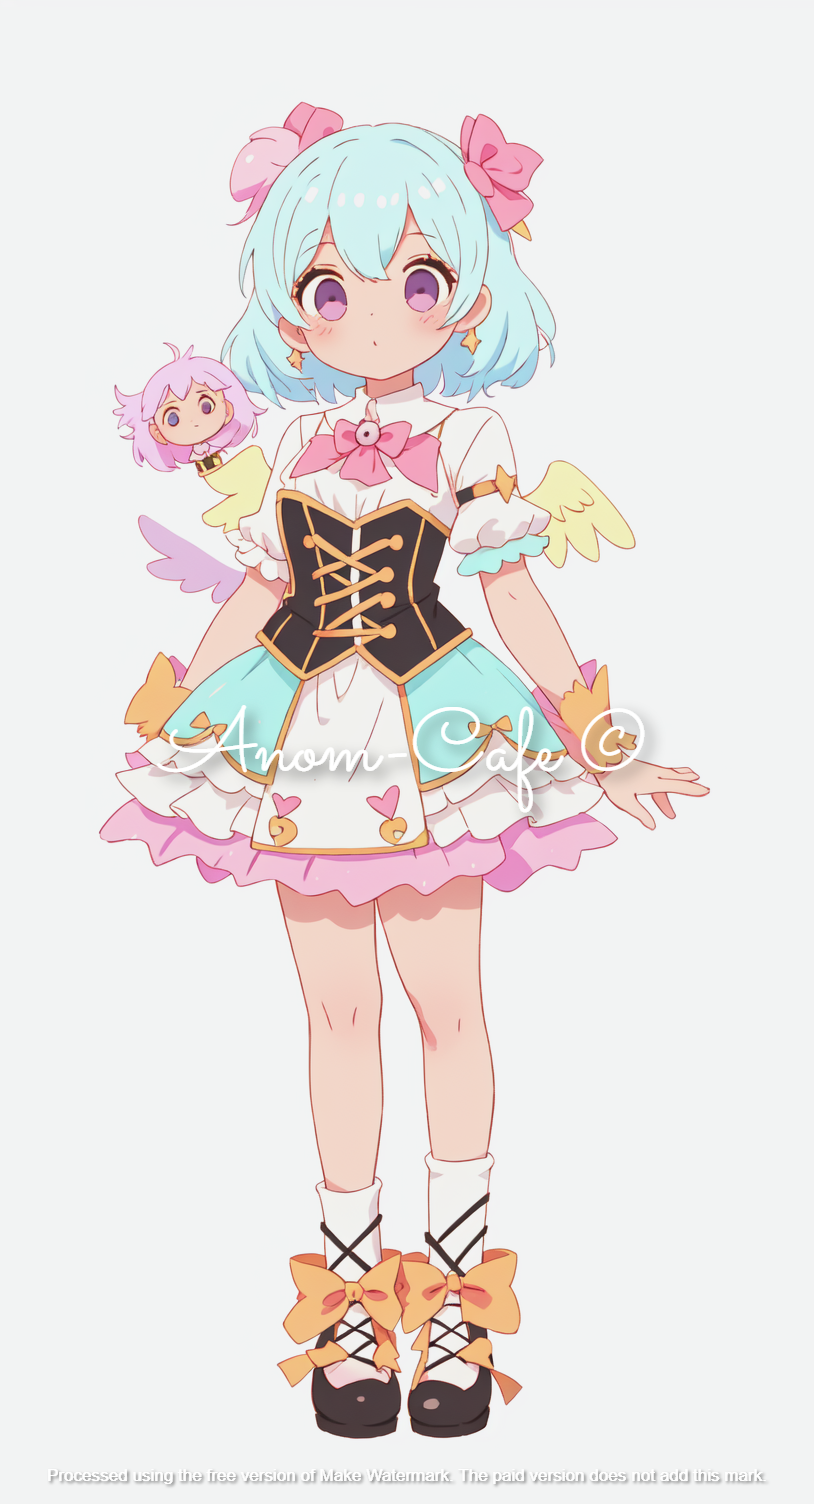 [CLOSED] ADOPT #17: Character - Pastel Angel Girl